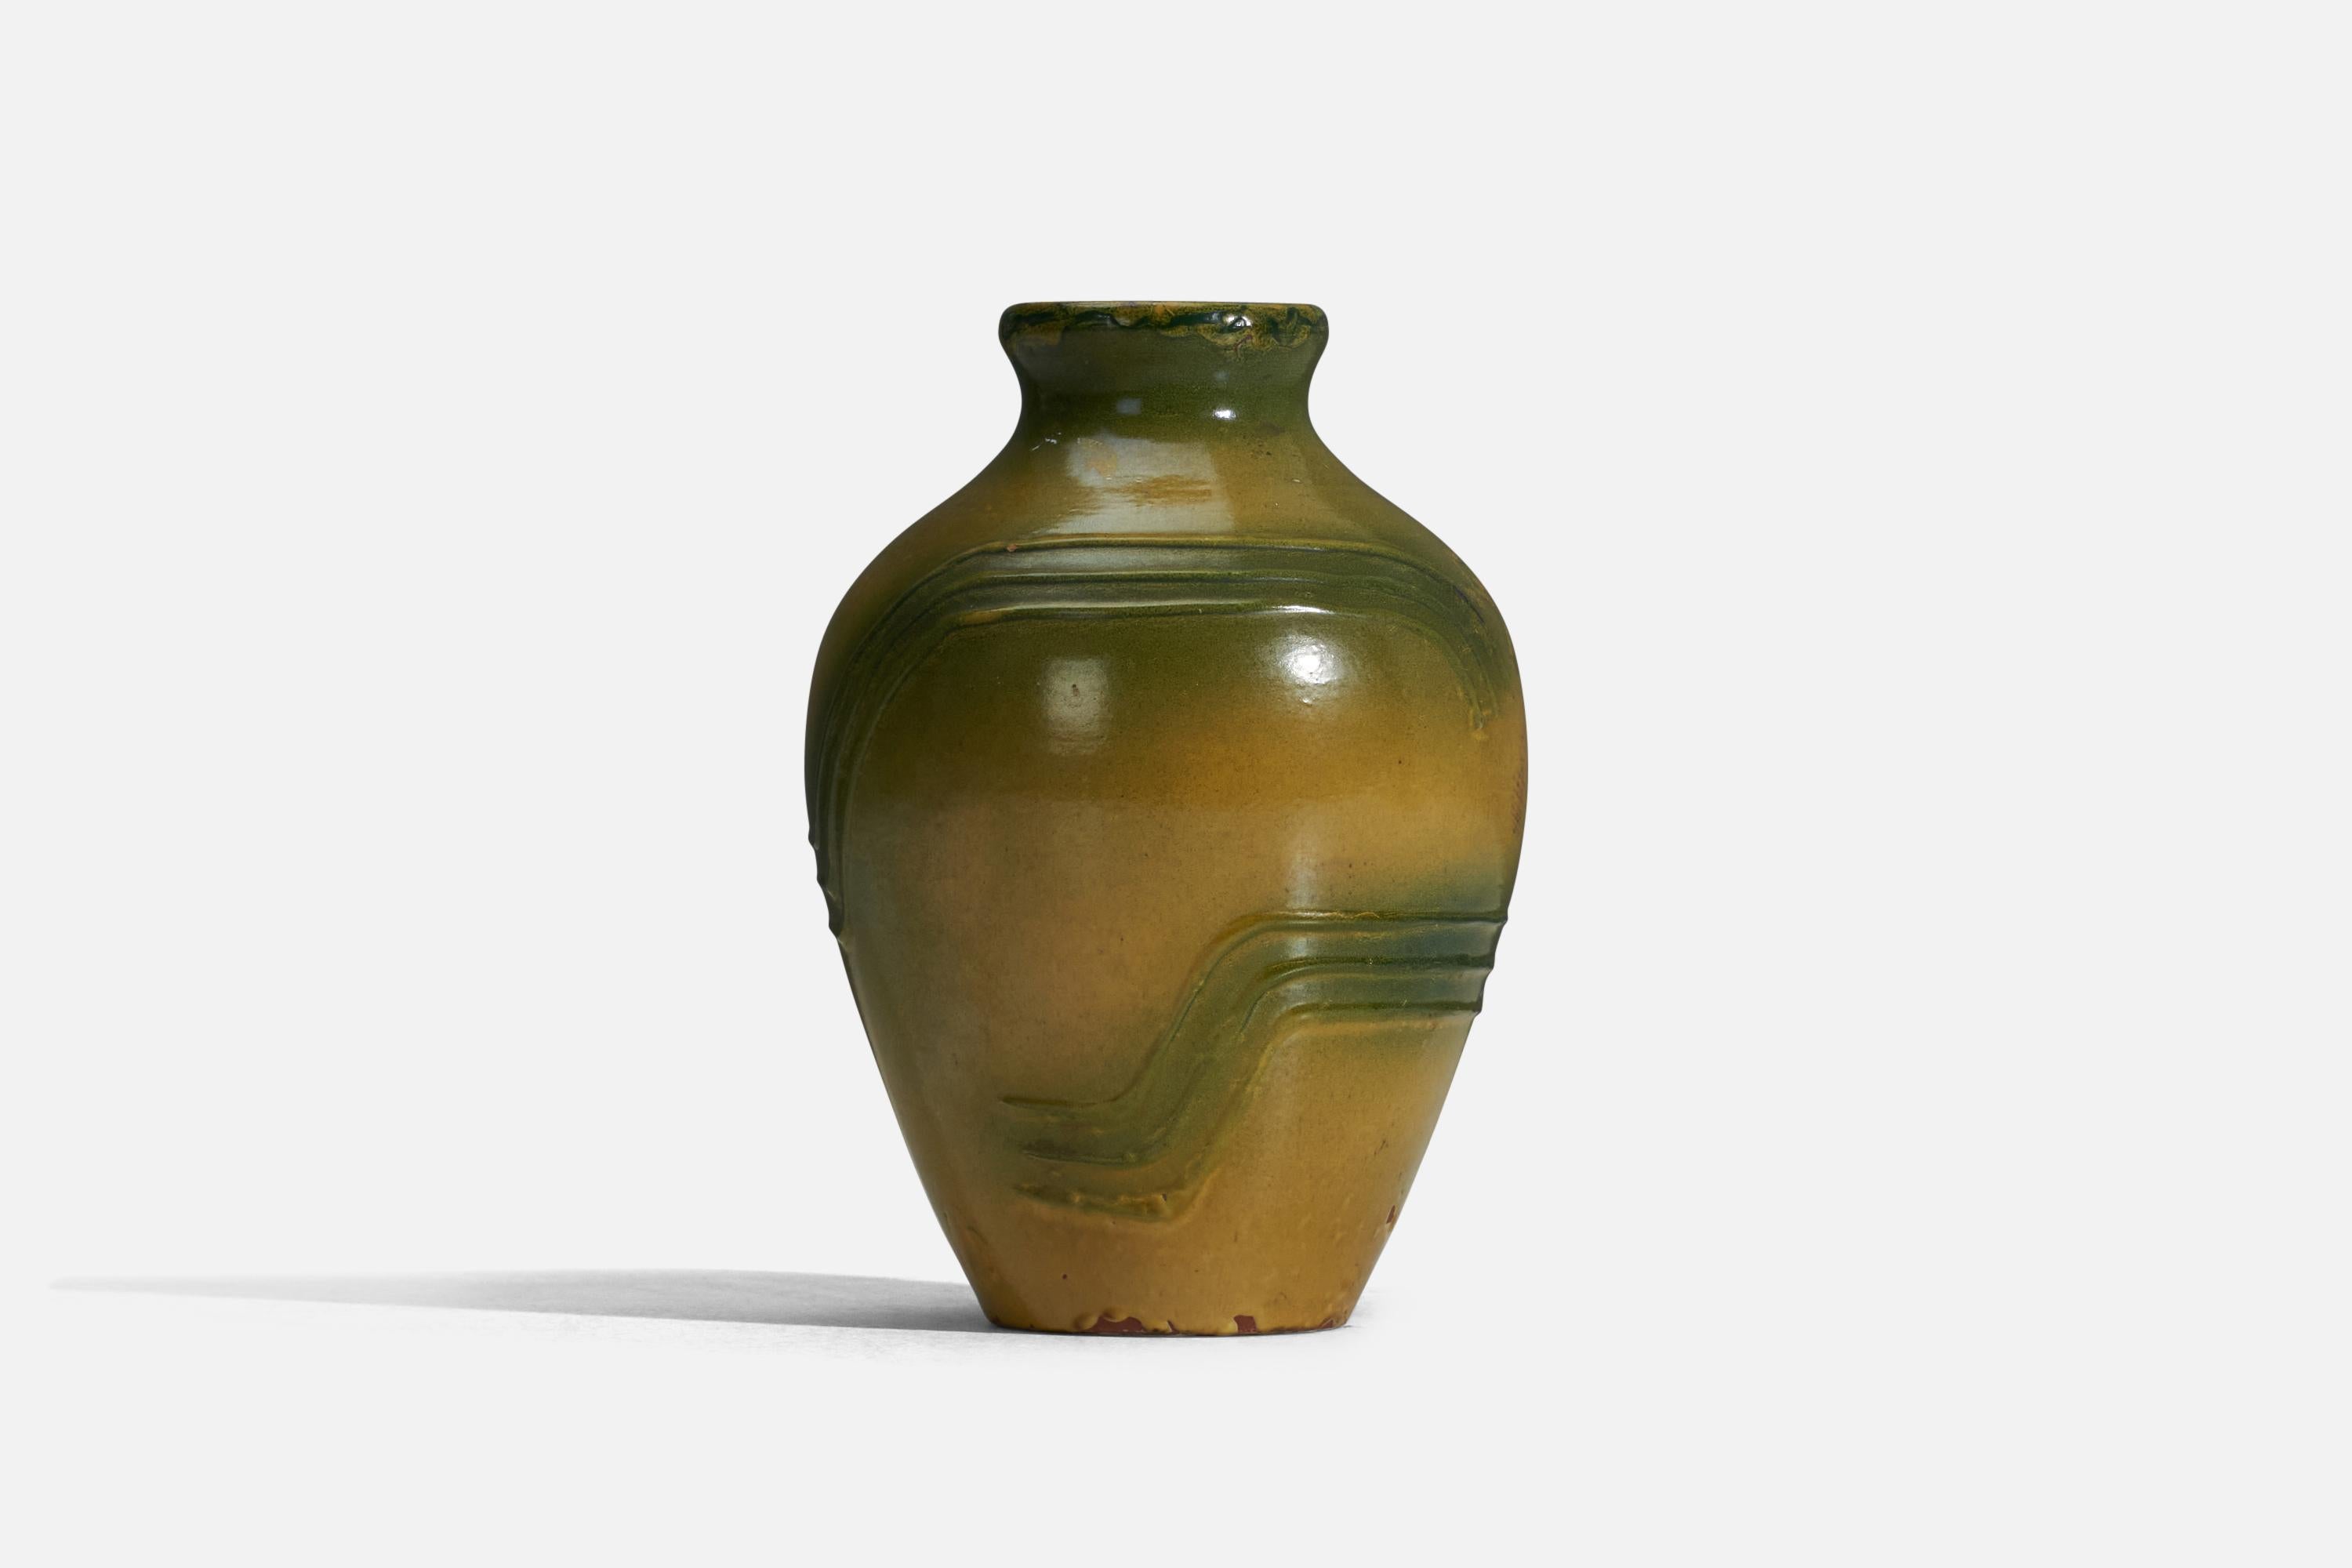 A green and yellow glazed earthenware vase designed by Erik Mornils and produced by Nittsjö, Sweden, 1940s.